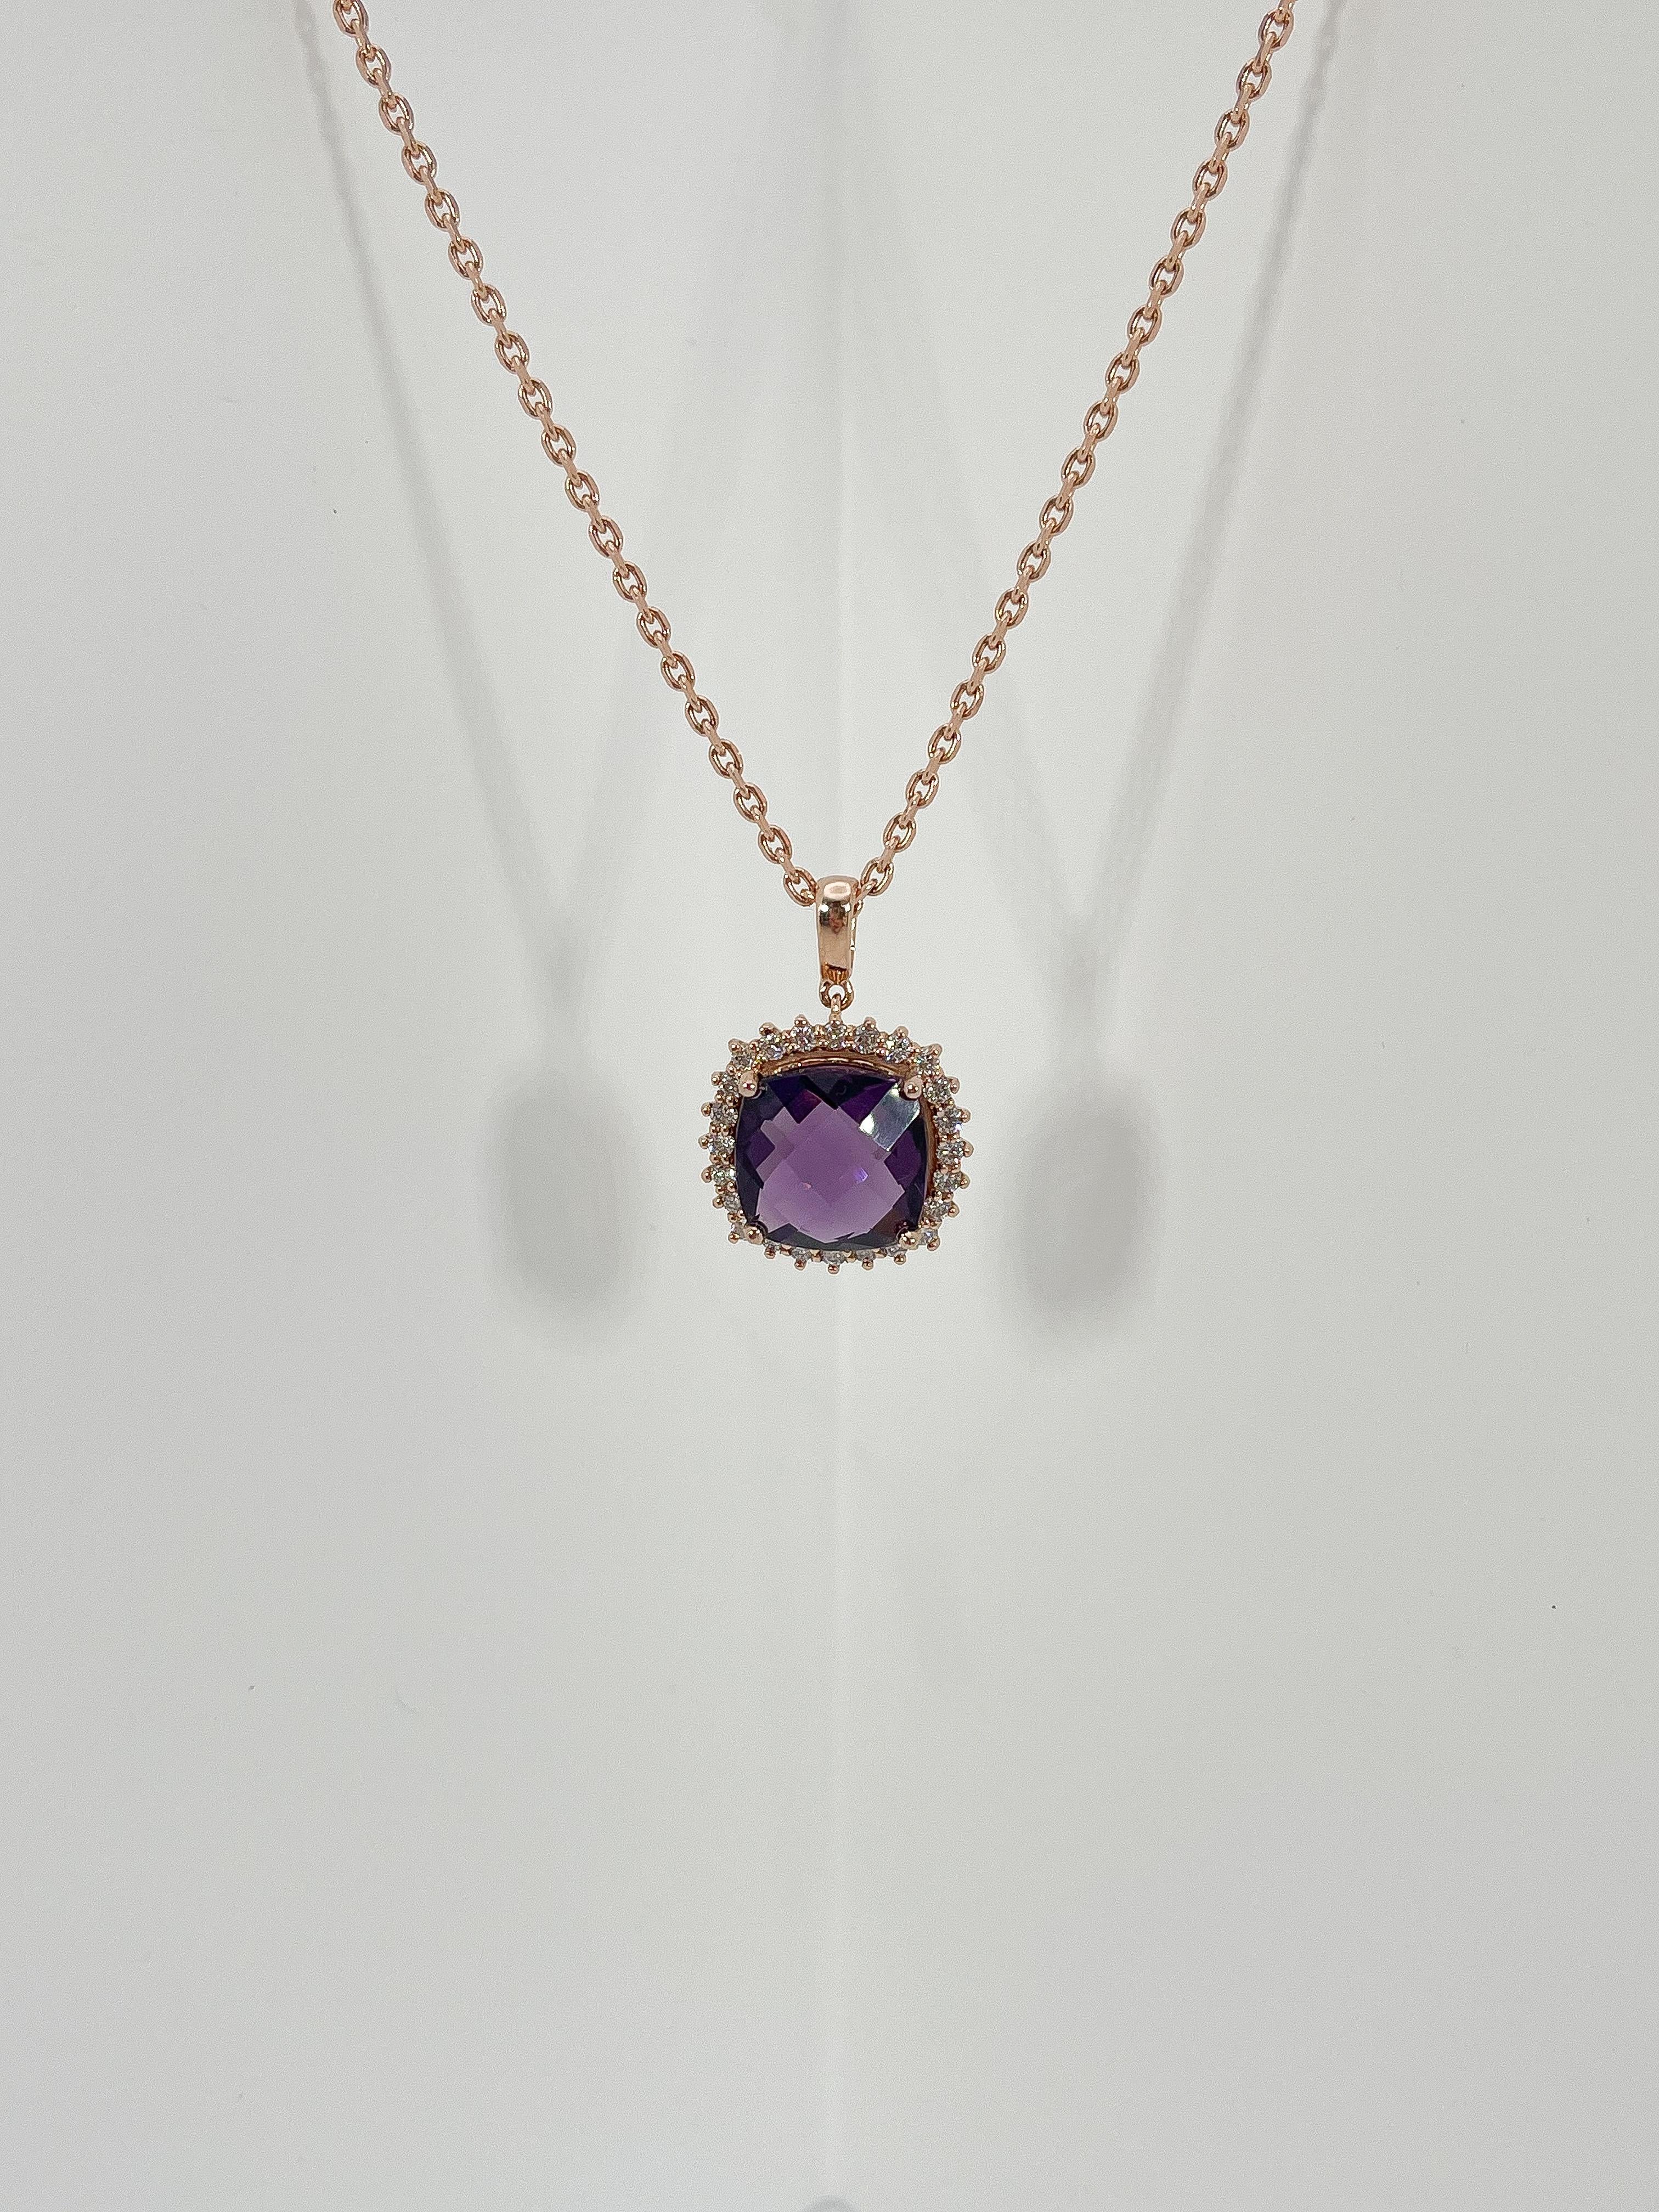 14k rose gold Amethyst and .60 CTW diamond halo pendant necklace. The Amethyst is cushion cut, measures to be 13mm x 13mm, the diamonds in the halo are all round, pendant comes on an 18 inch diamond cut cable chain with a lobster clasp to open and